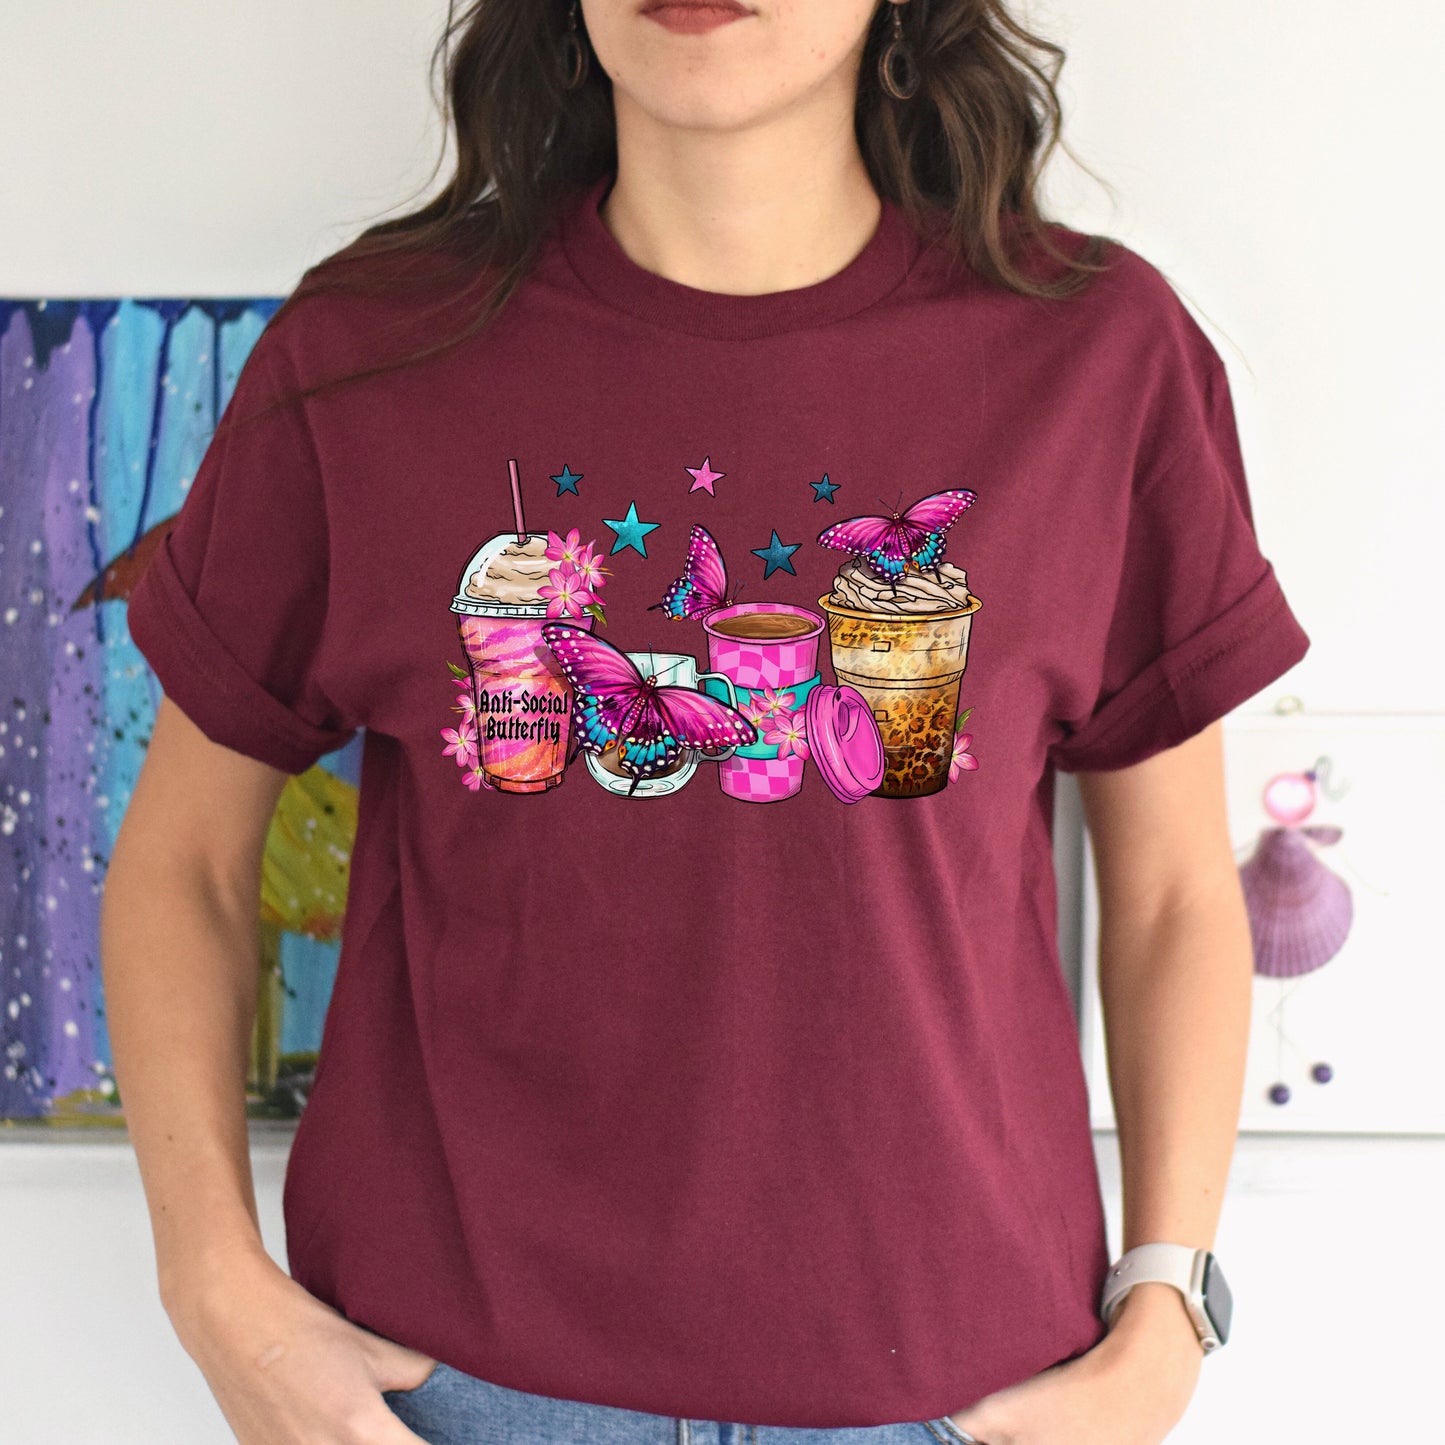 Anti-social butterfly coffee cups unisex tshirt S-5XL-Family-Gift-Planet